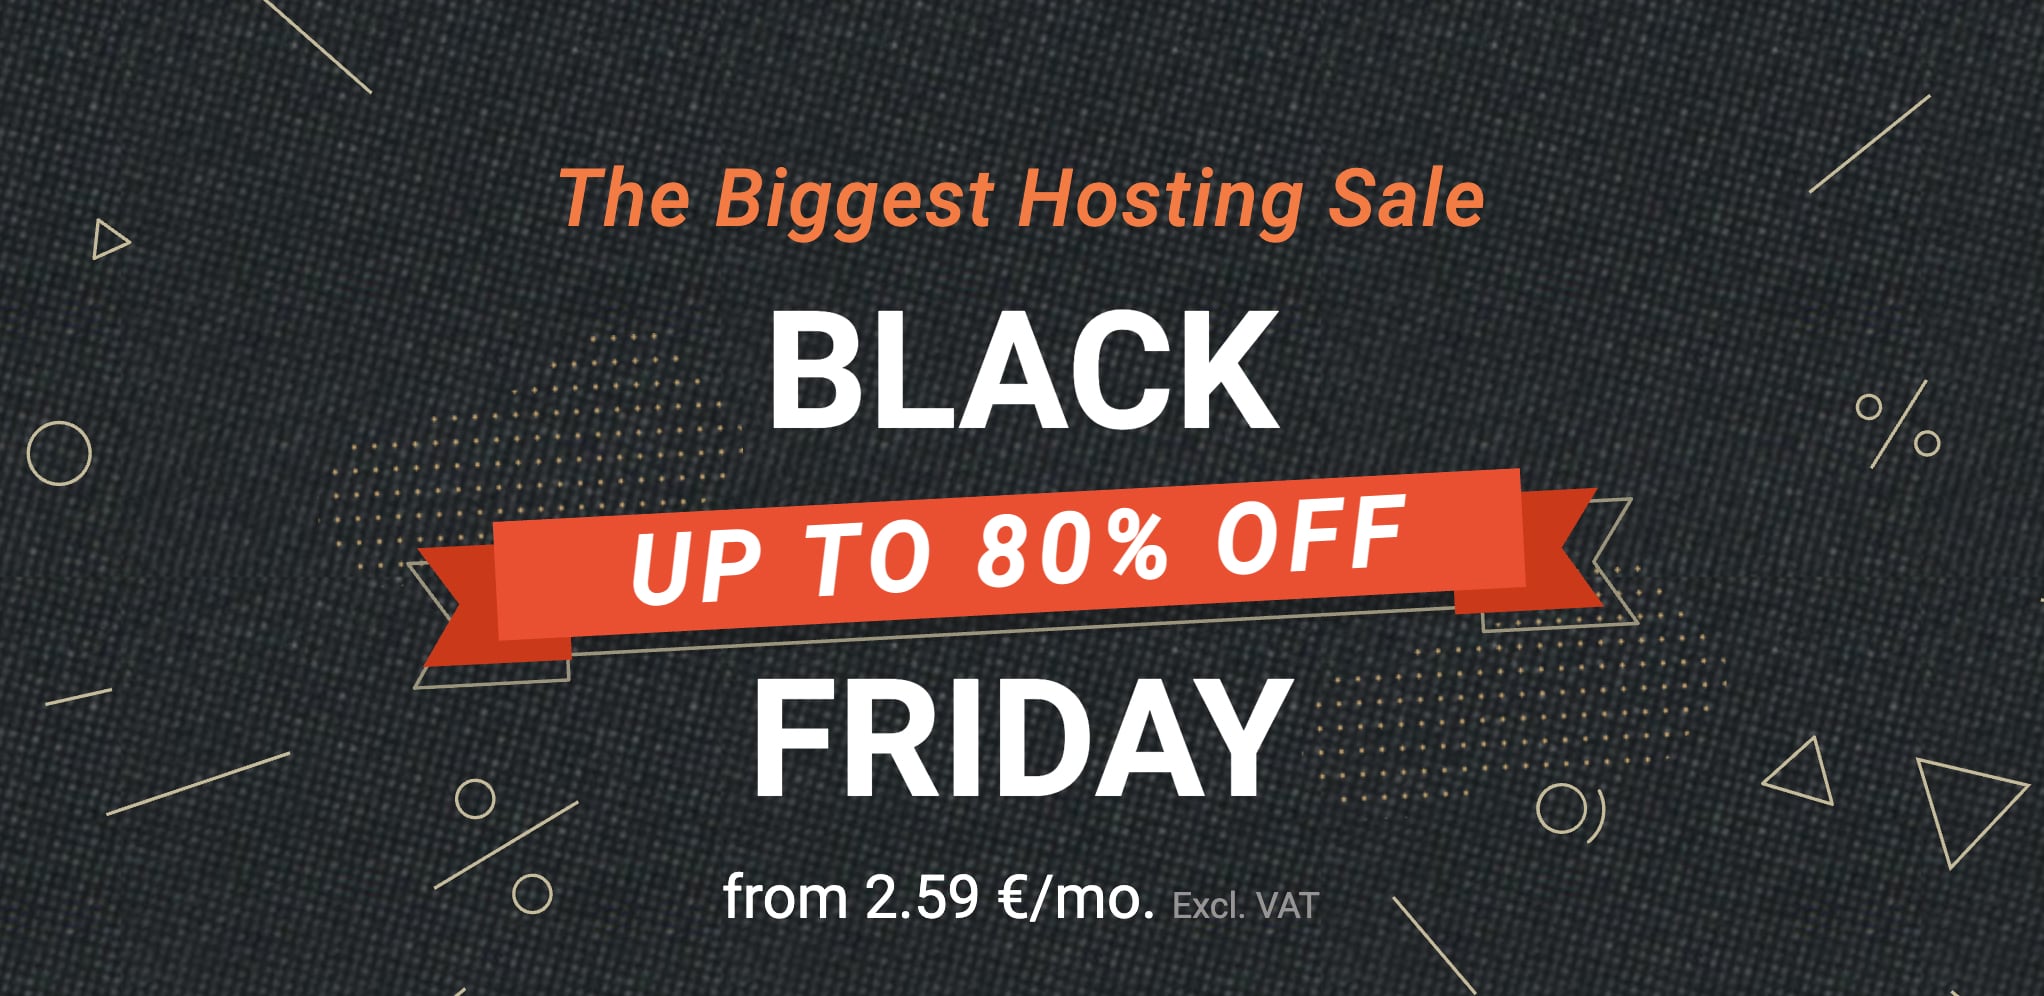 siteground black friday 2021 - Up to 80% OFF